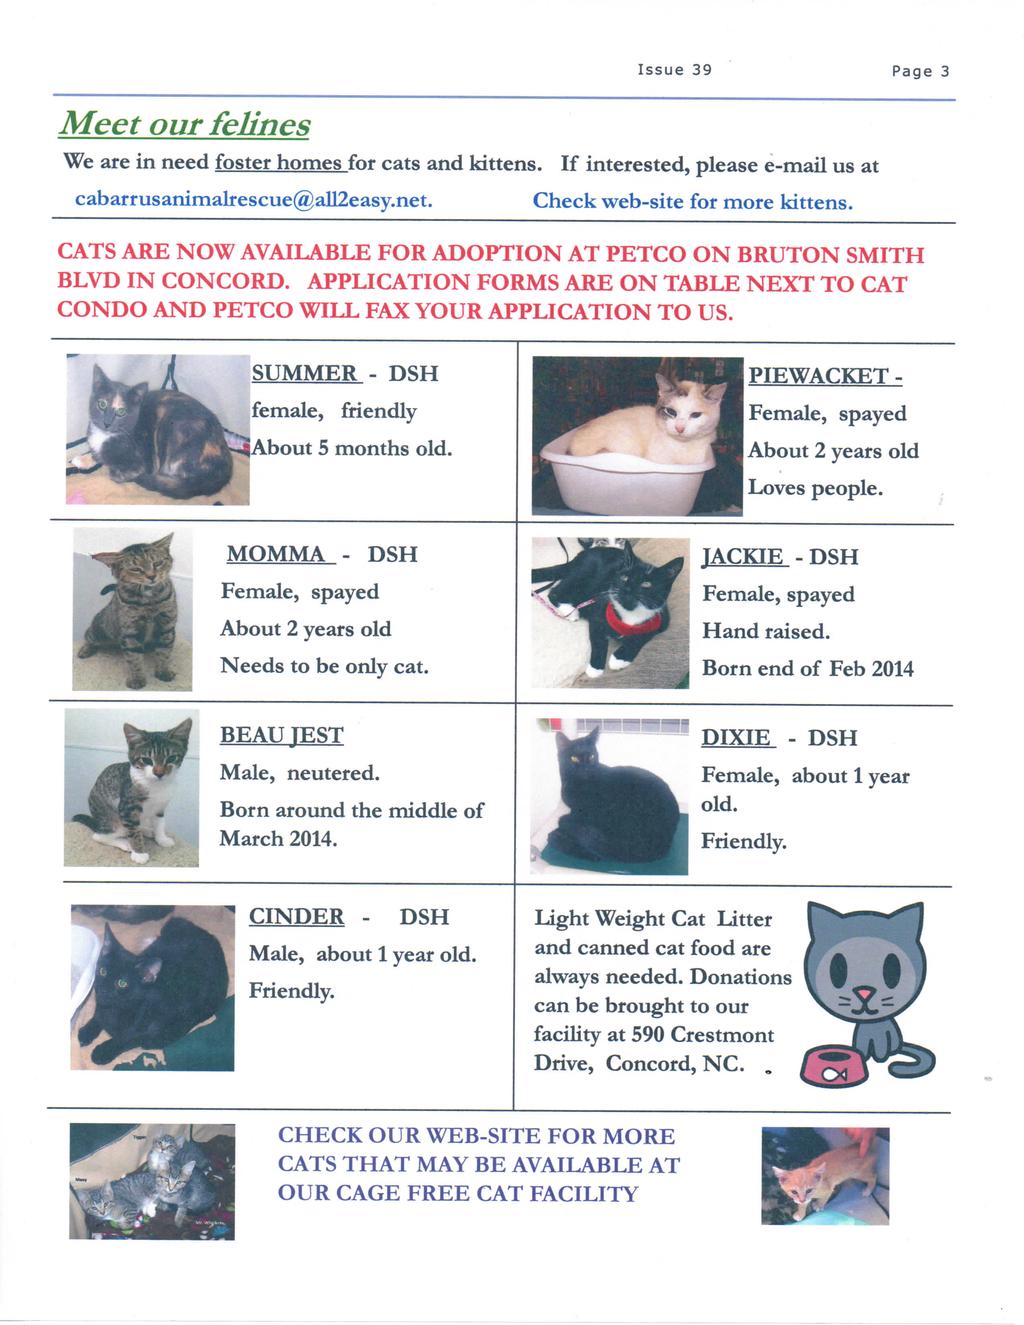 Meet our felines Issue 39 Page 3 We are in need foster homes for cats and kittens. If interested, please e-mail us at cabarrusanimalrescue@all2easy.net. Check web-site for more kittens.